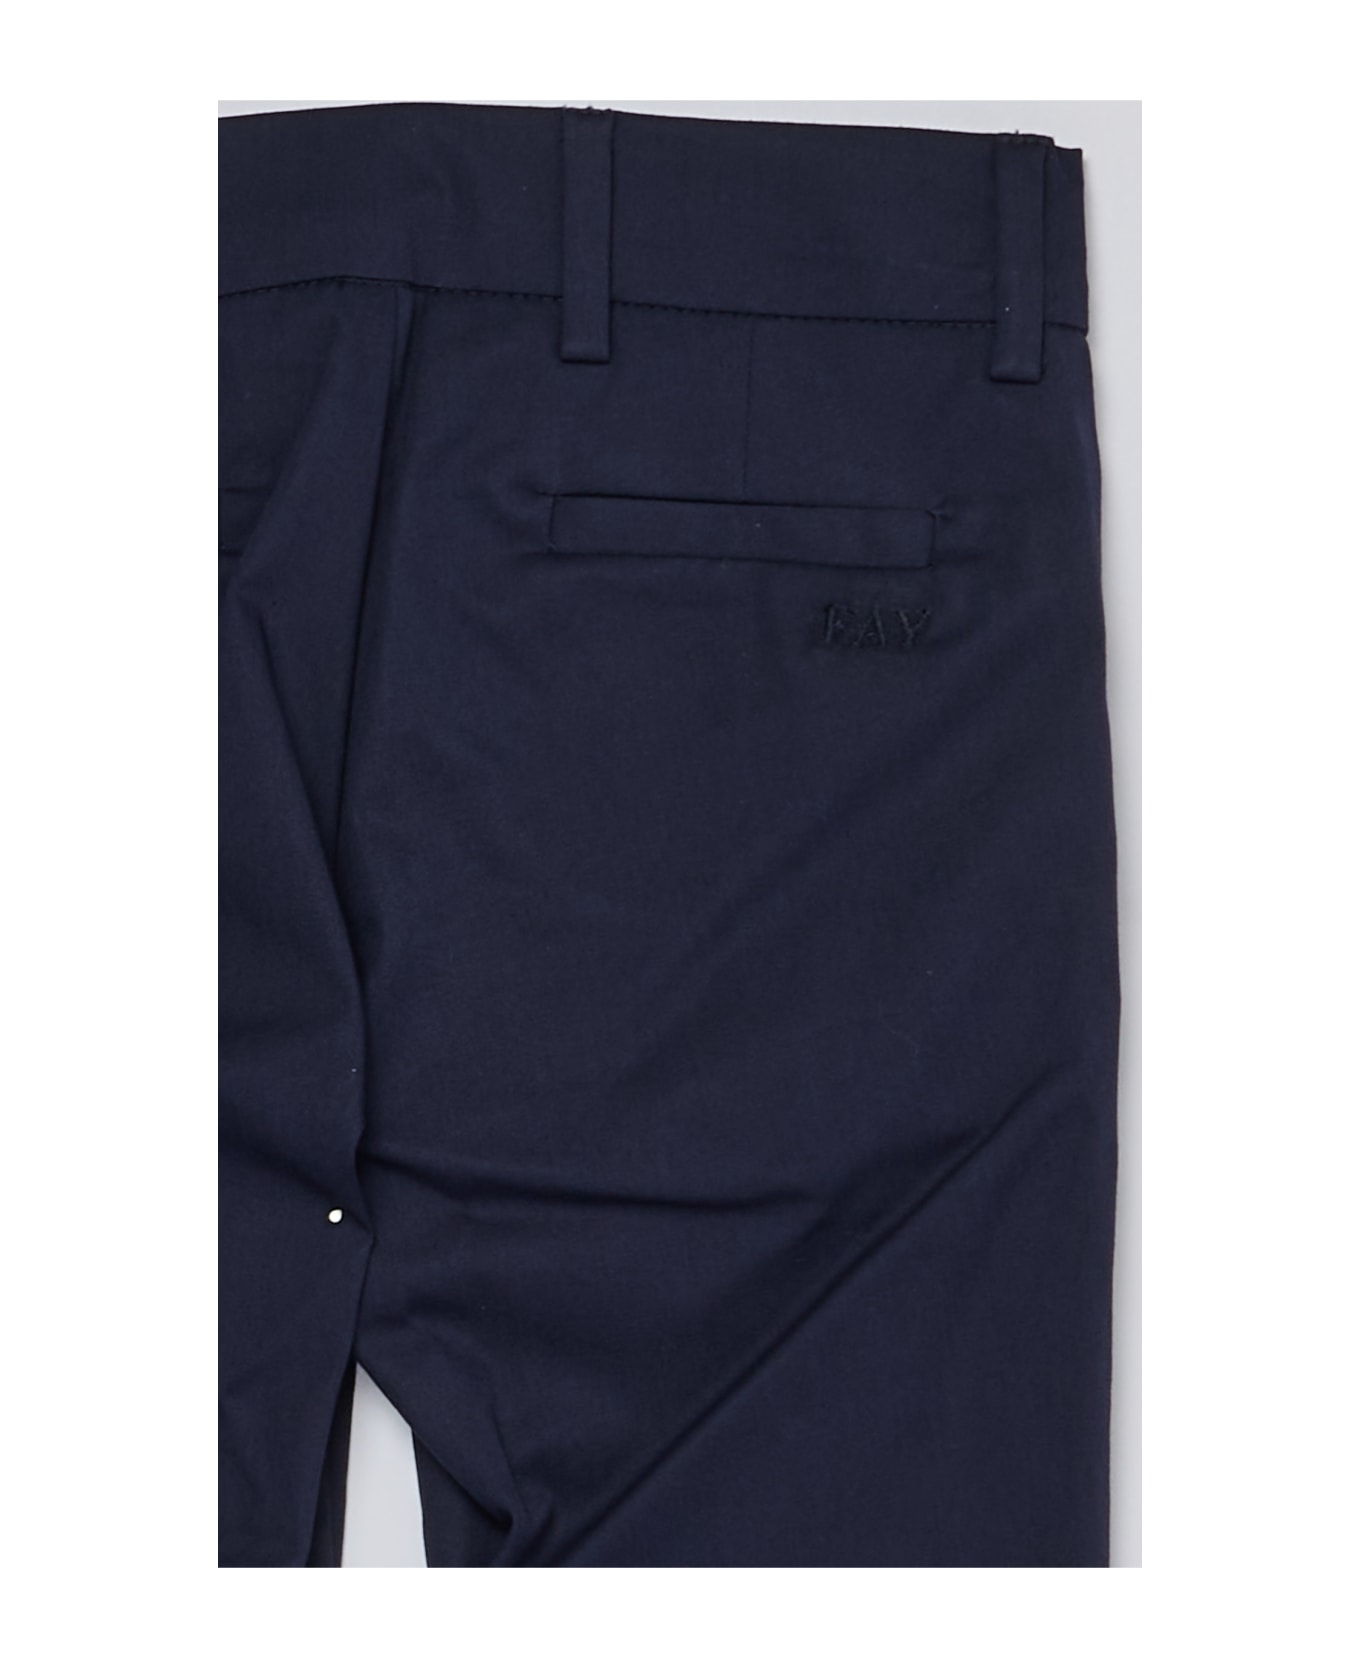 Fay Trousers Trousers - BLU ボトムス